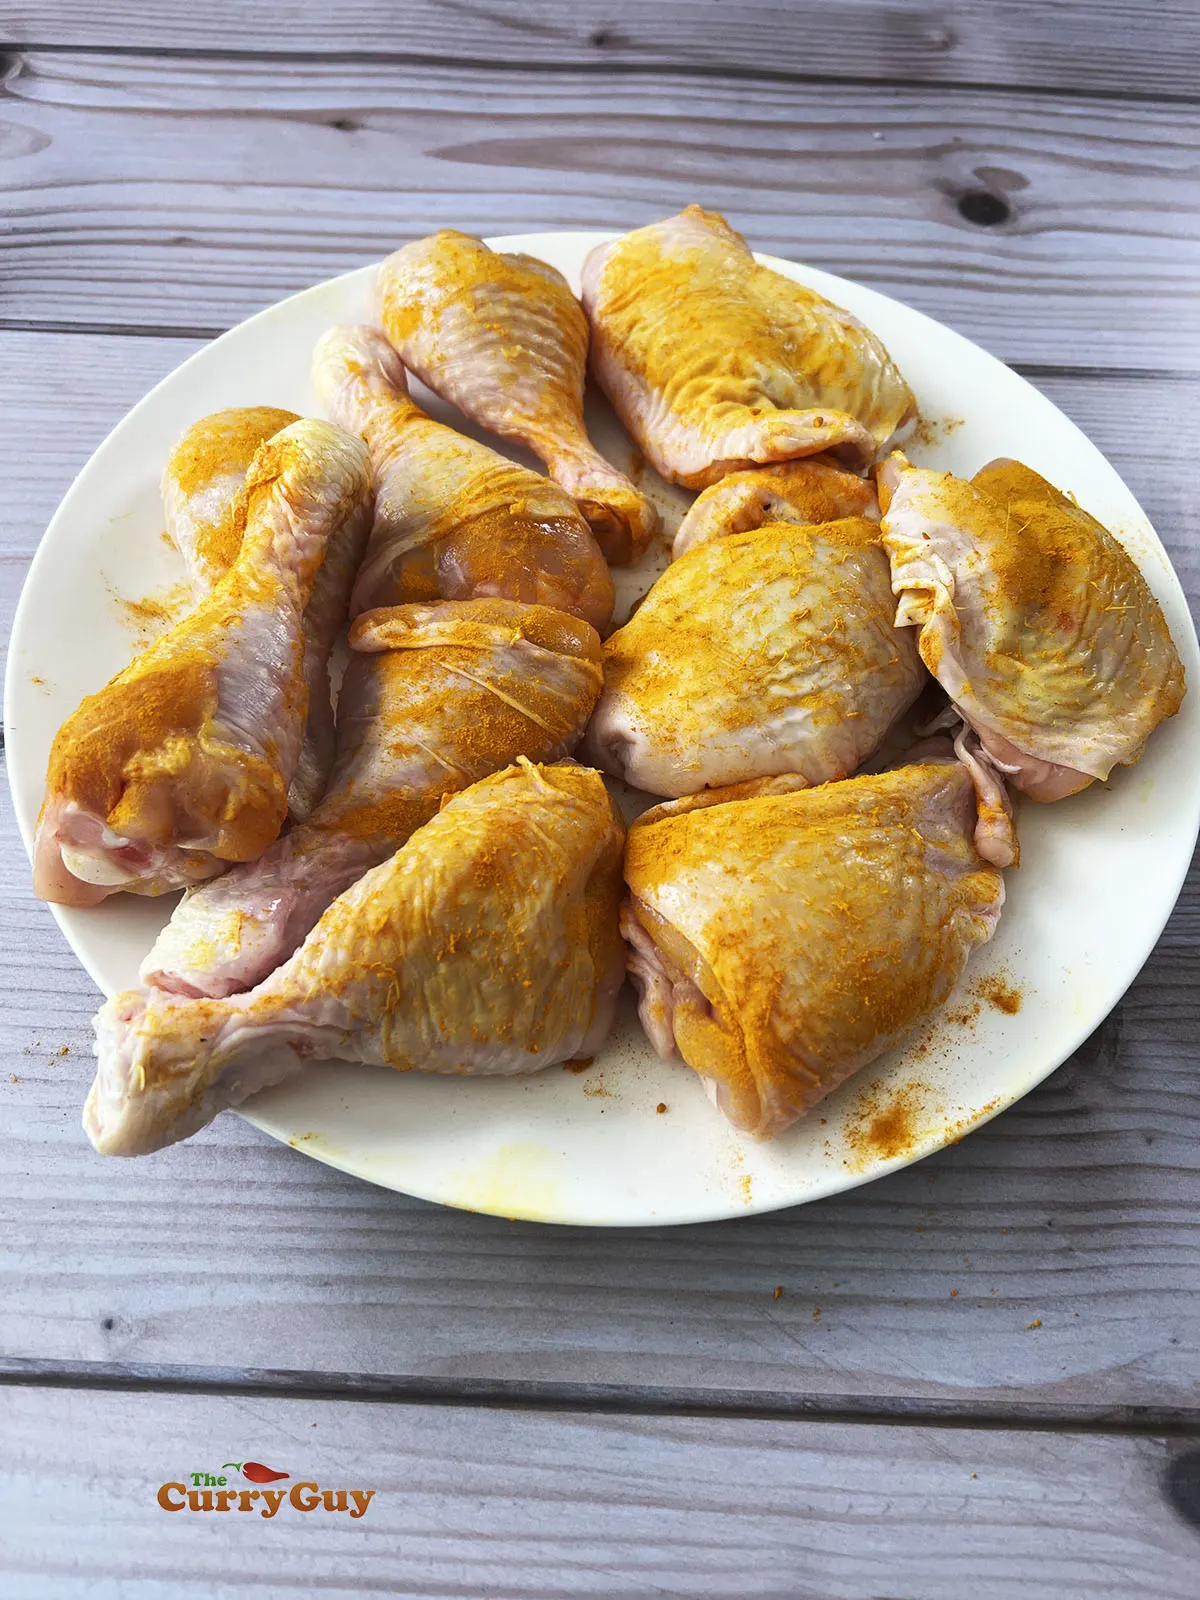 Chicken with turmeric rubbed into the skin